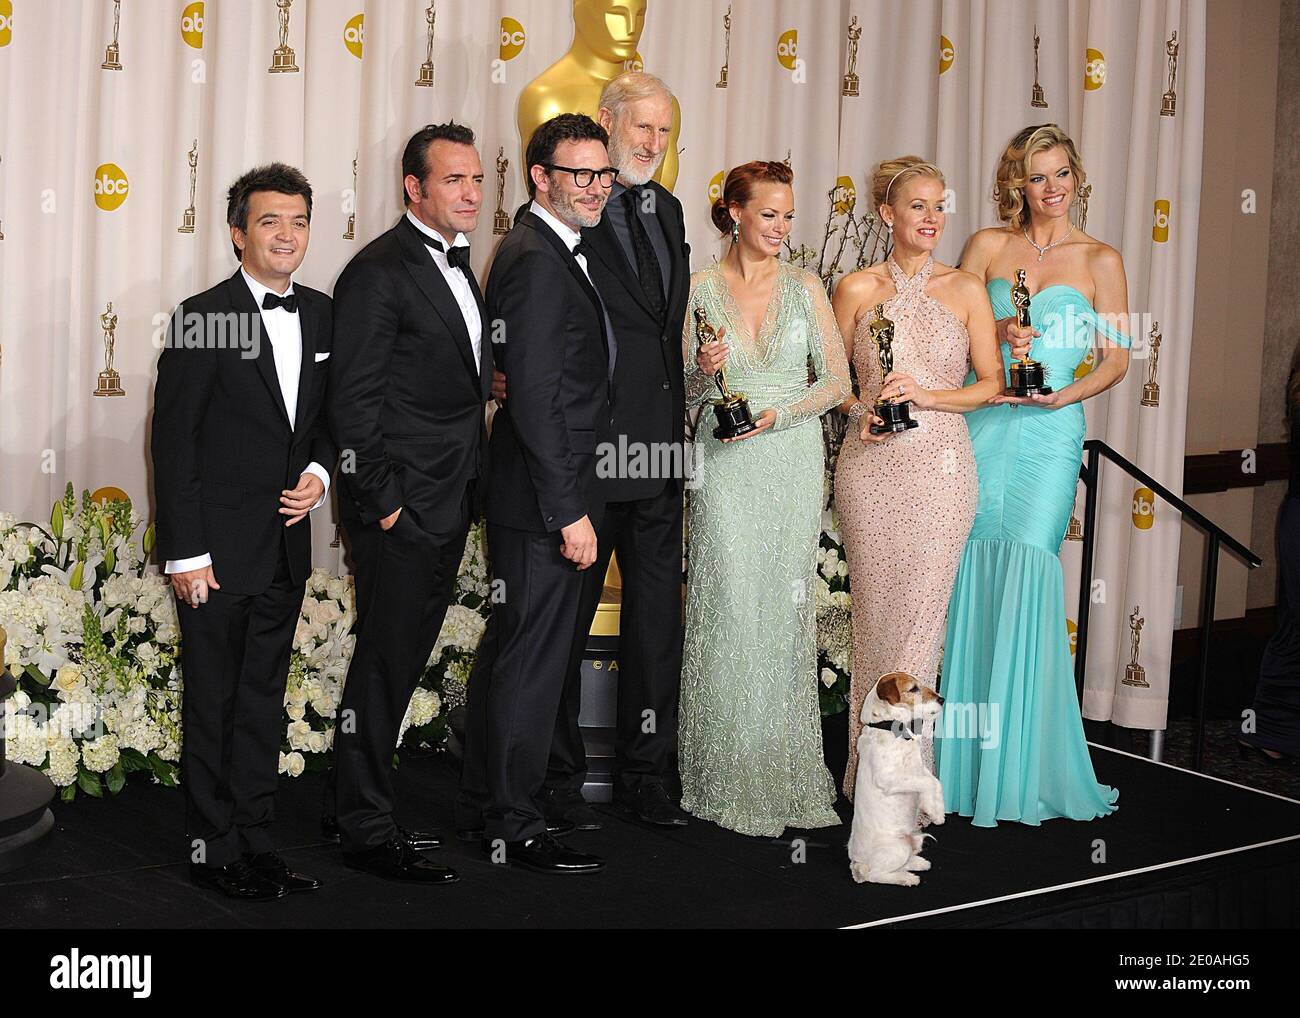 Cast and crew of The Artisy pose with their awards in the press room at the 84th Annual Academy Awards held at the Kodak Theatre in Los Angeles, CA, USA on February 26, 2012. Photo by Lionel Hahn/ABACAPRESS.COM Stock Photo